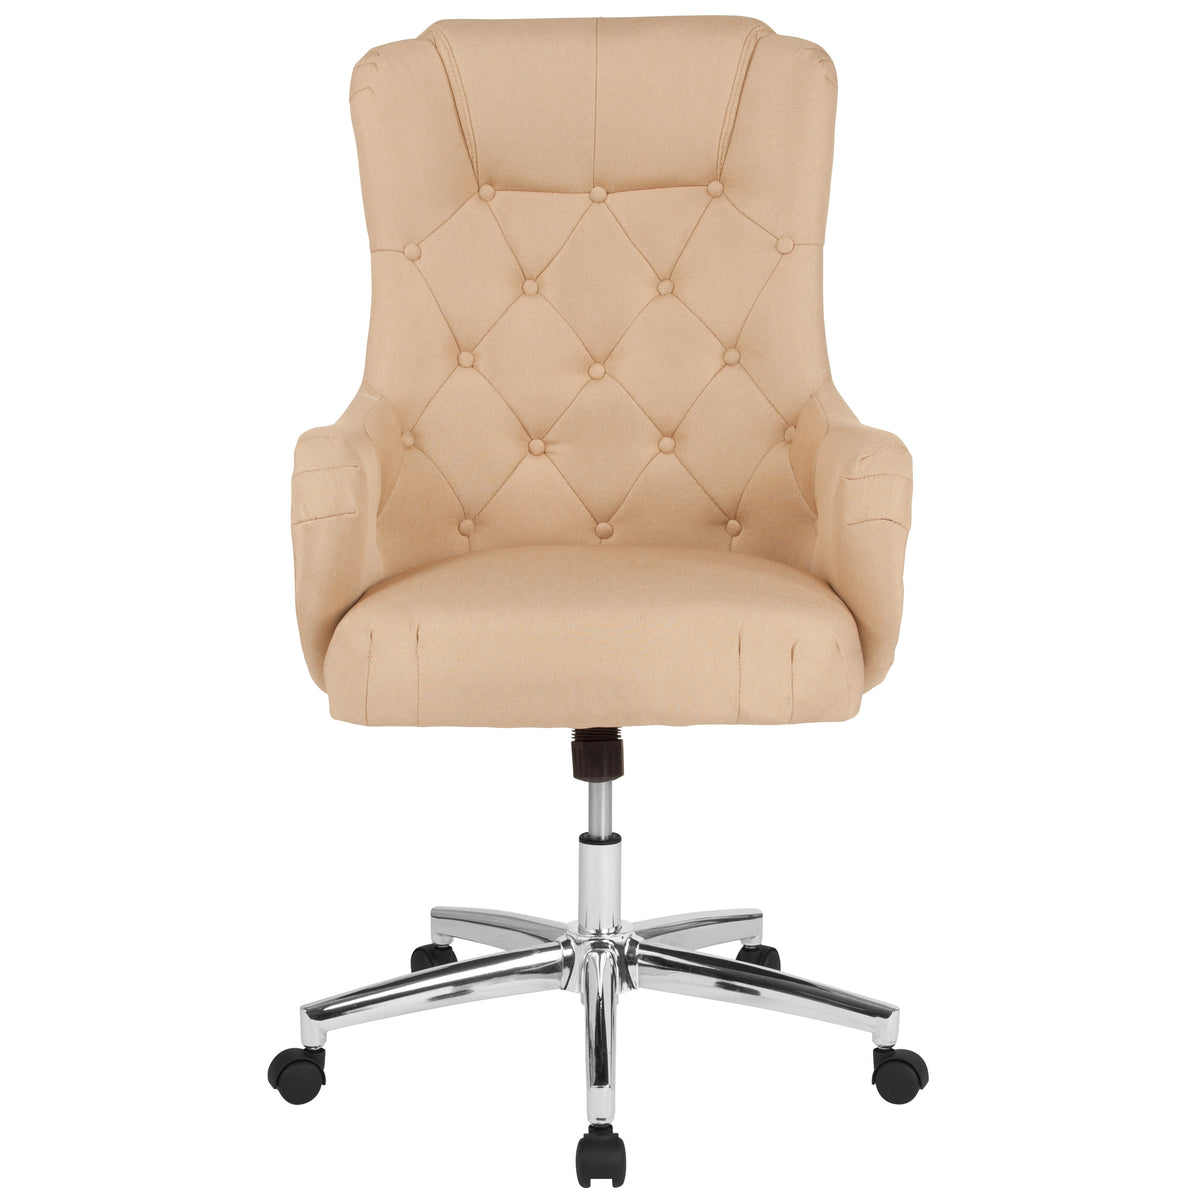 Beige Fabric |#| Home and Office Diamond Patterned Button Tufted High Back Chair in Beige Fabric